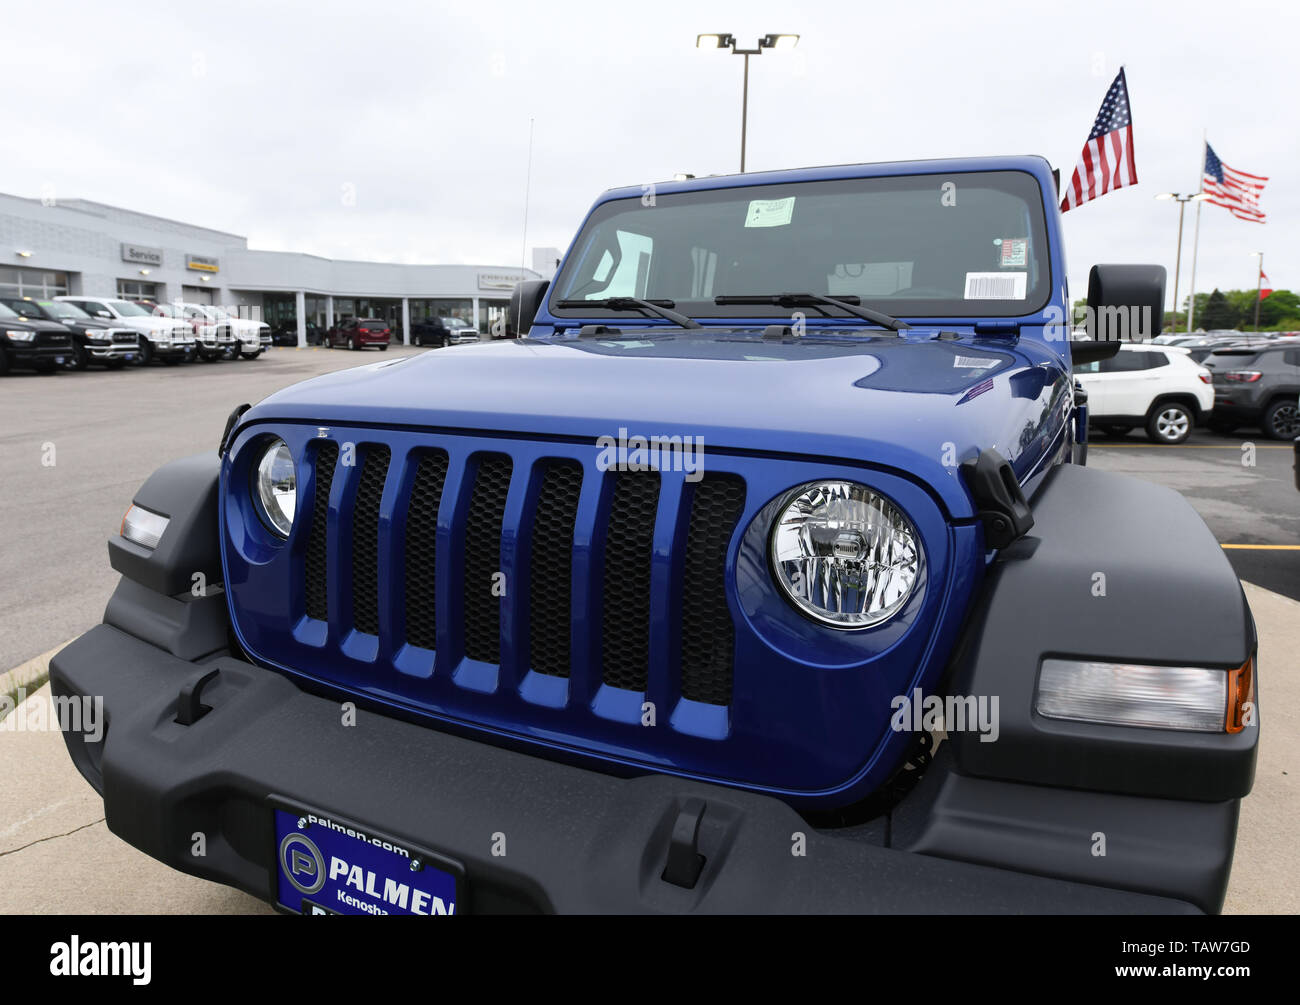 Mount Pleasant, Wisconsin, USA. 28th May, 2019. Fiat Chrysler (FCA) - maker  of Dodge, Chrysler, Jeep, and RAM truck brands, among others, is proposing  a merger with French automaker Renault. New Jeeps